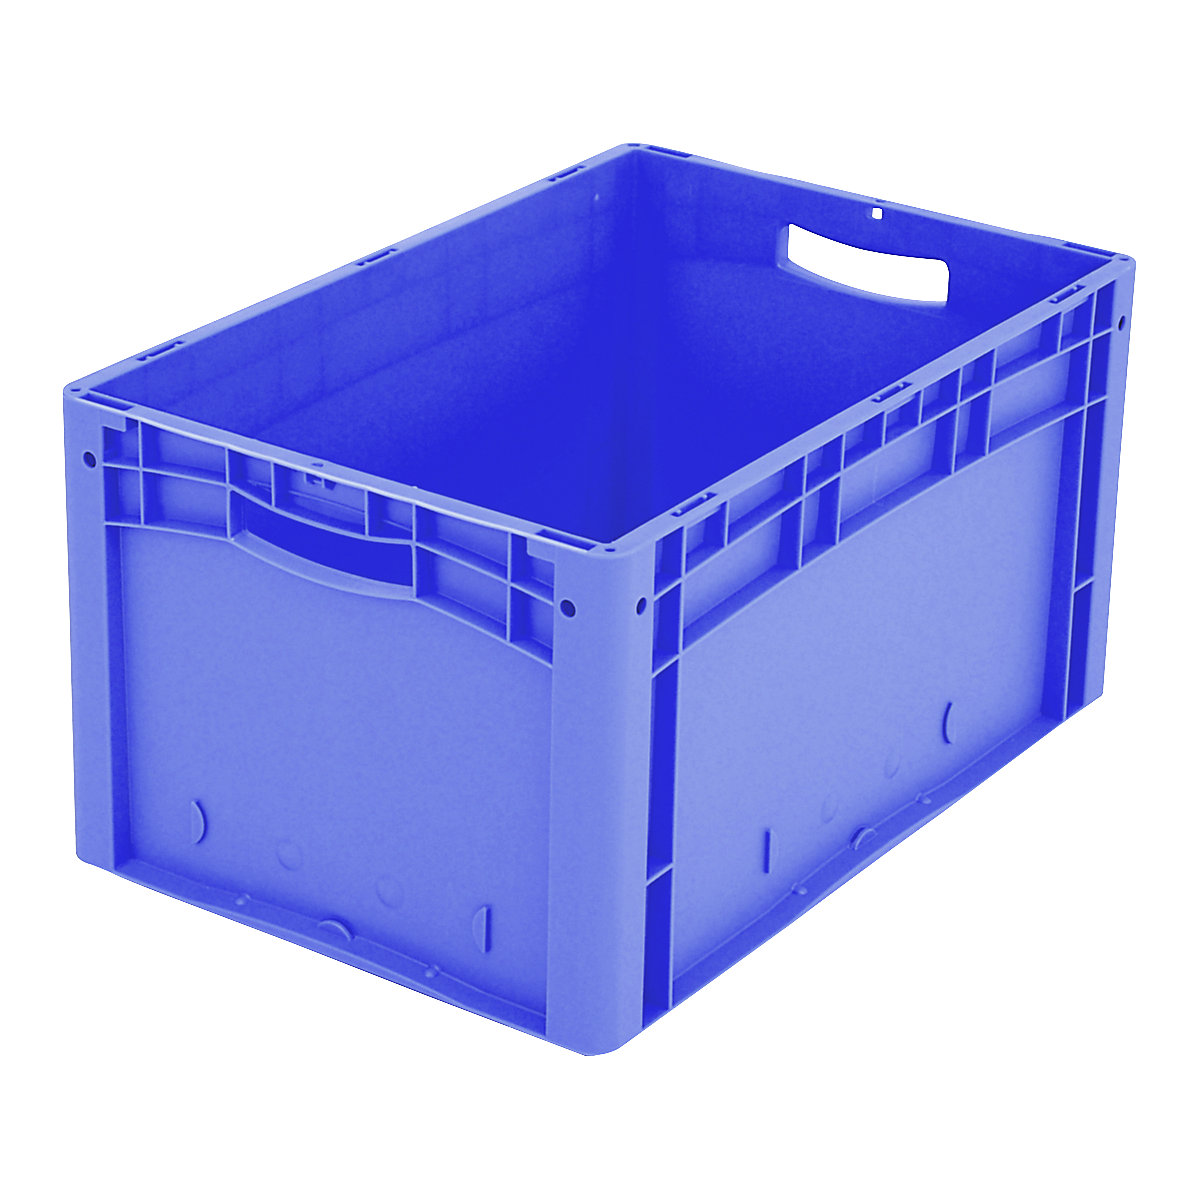 XL Euro stacking container – BITO, standard model, LxWxH 600 x 400 x 320 mm-10